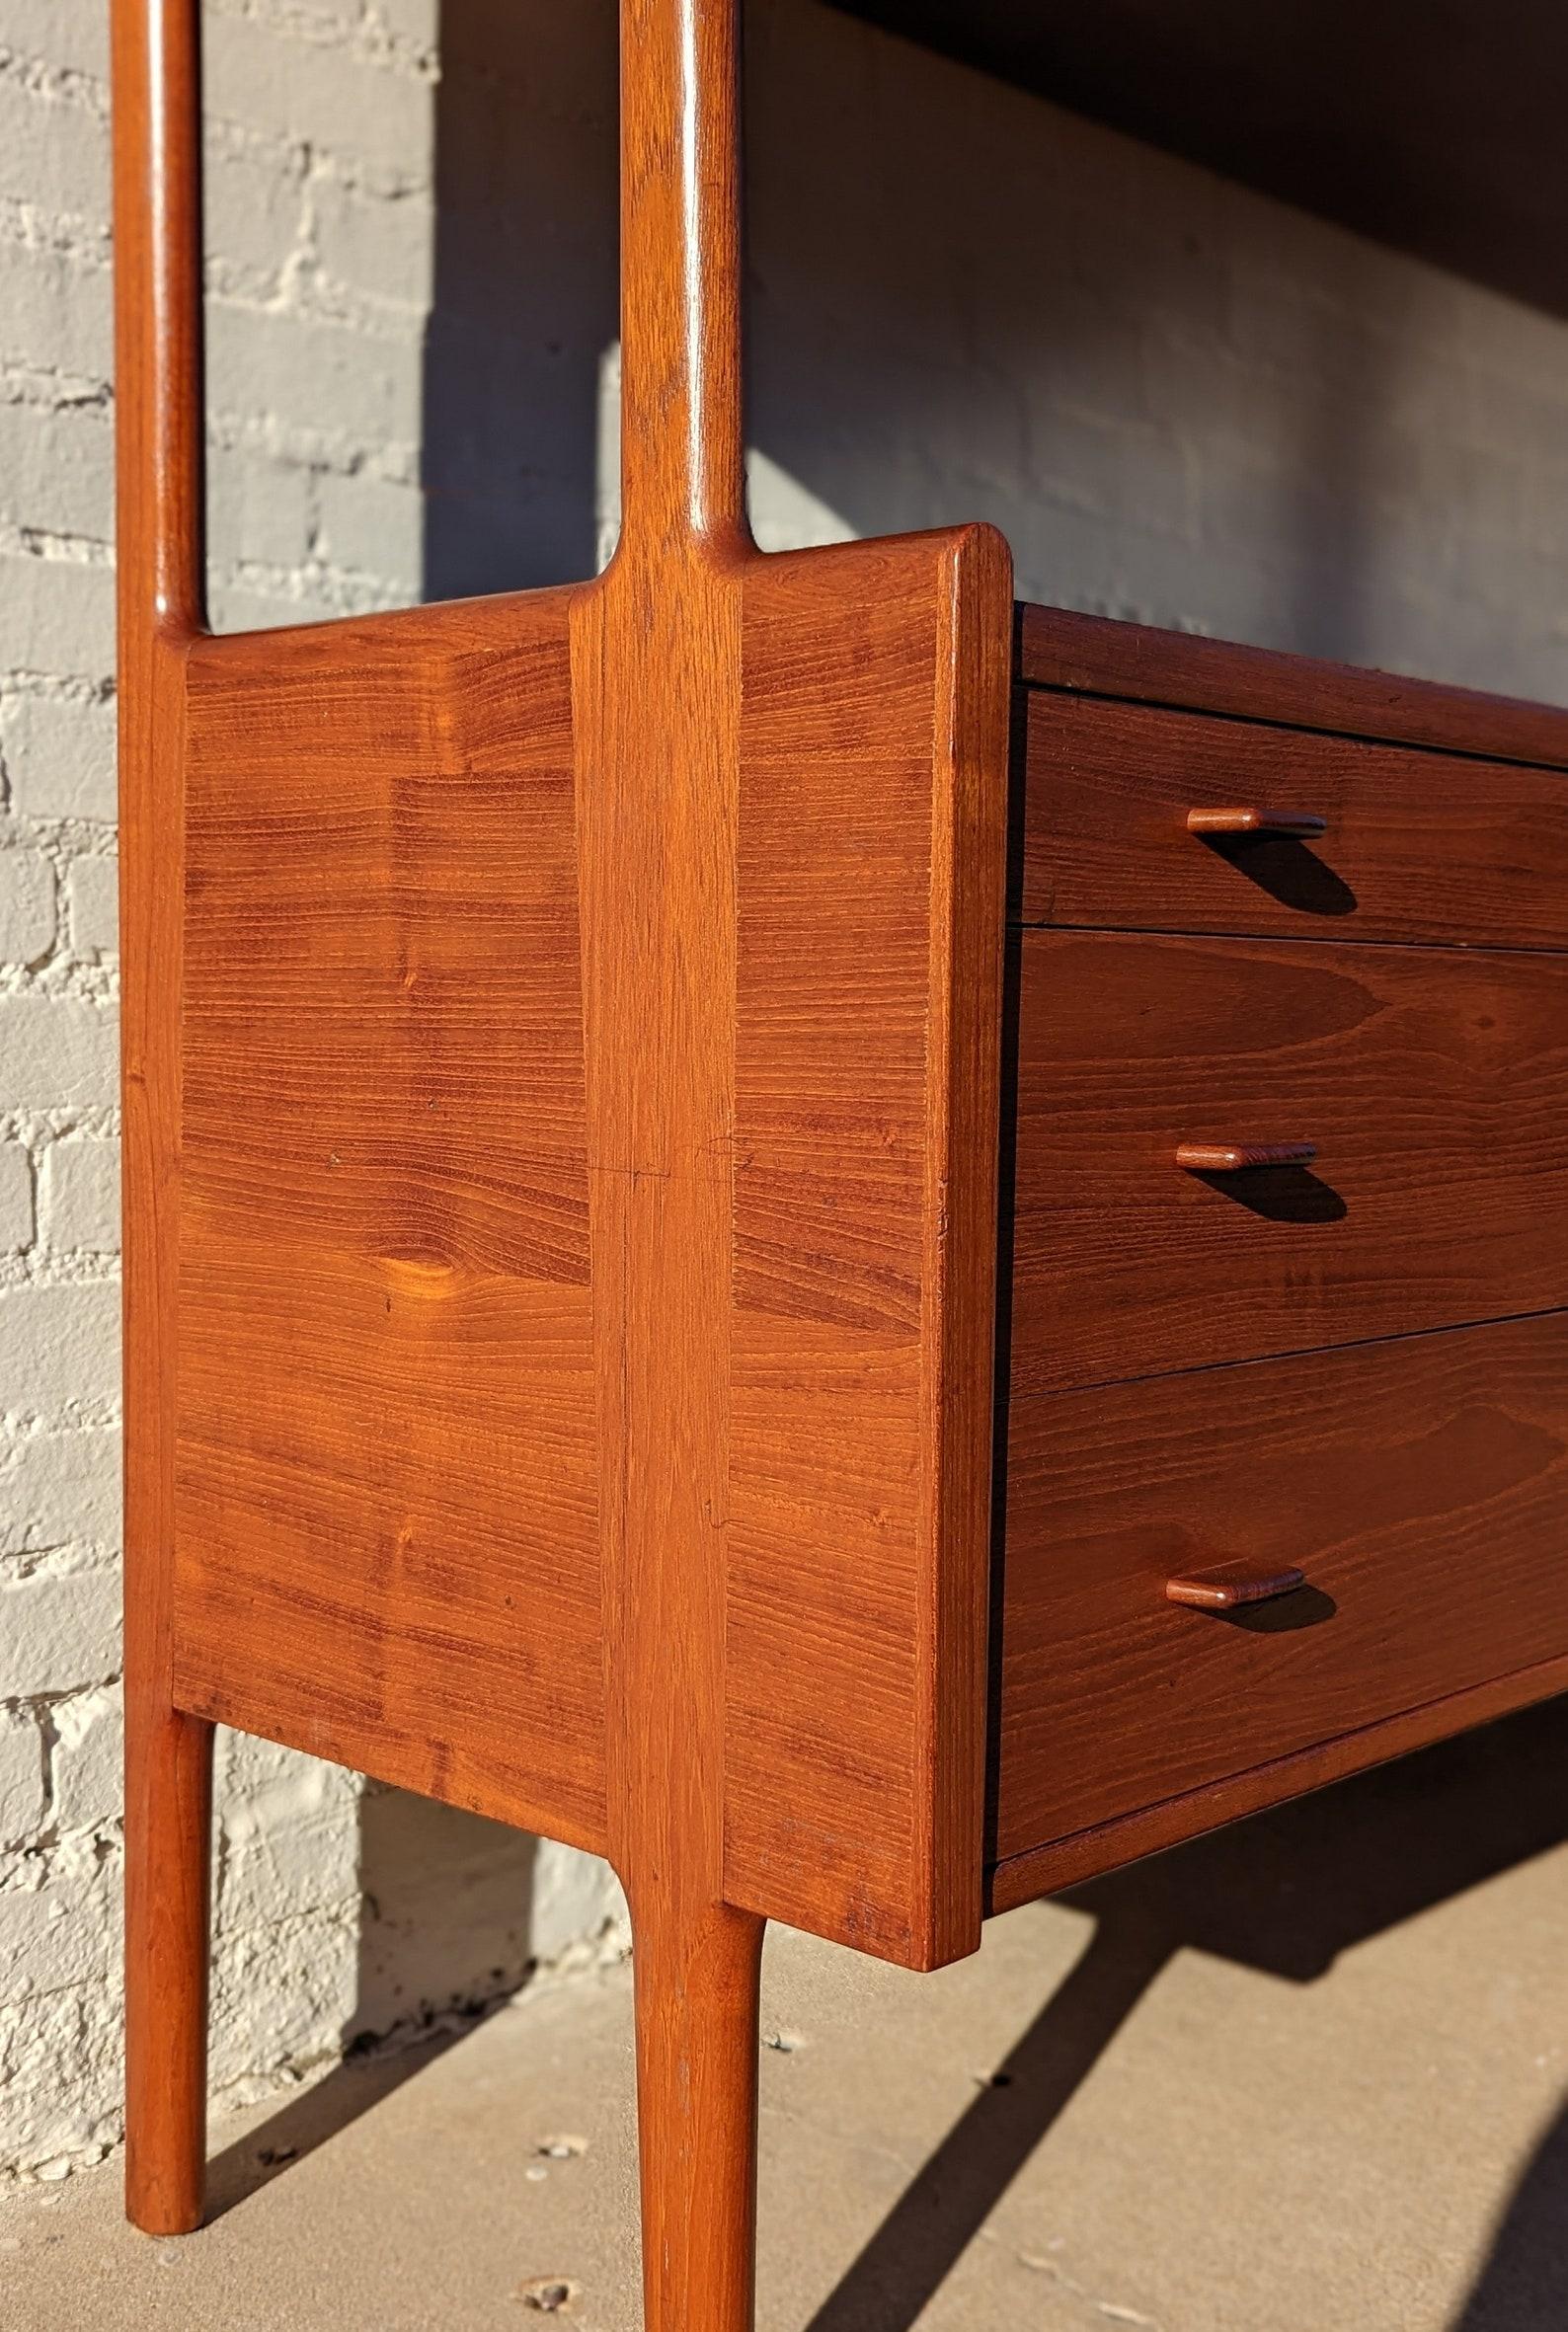 Mid Century Danish Modern Hans Wegner RY 20 Teak High Cabinet

Above average vintage condition and structurally sound. Has some expected slight finish wear and scratching on frame. Upholstery is new. Outdoor listing pictures might appear slightly